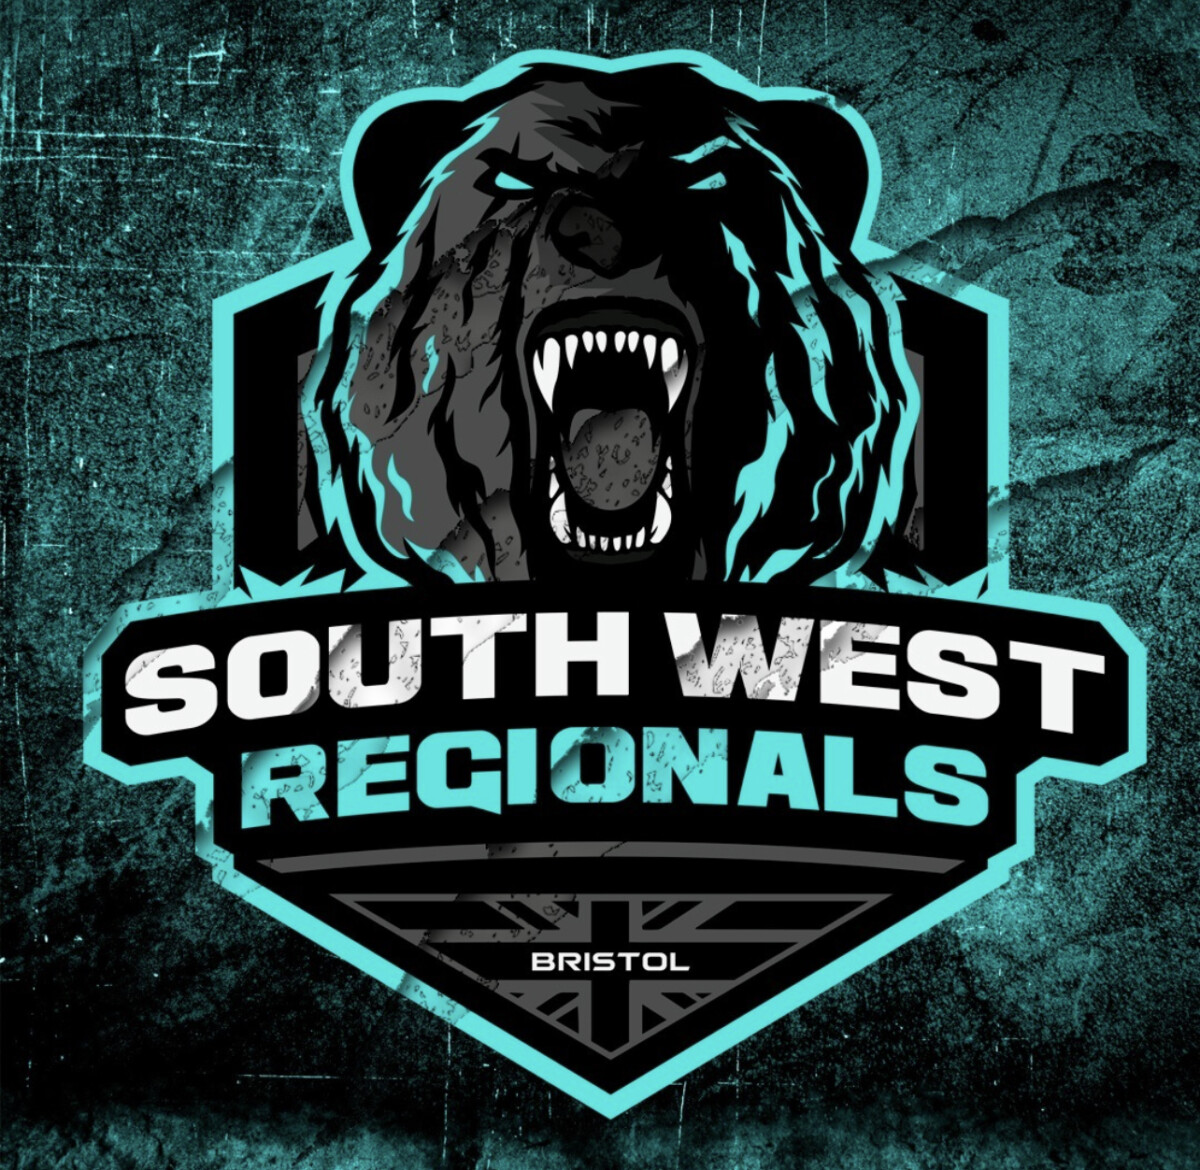 The South West Regionals